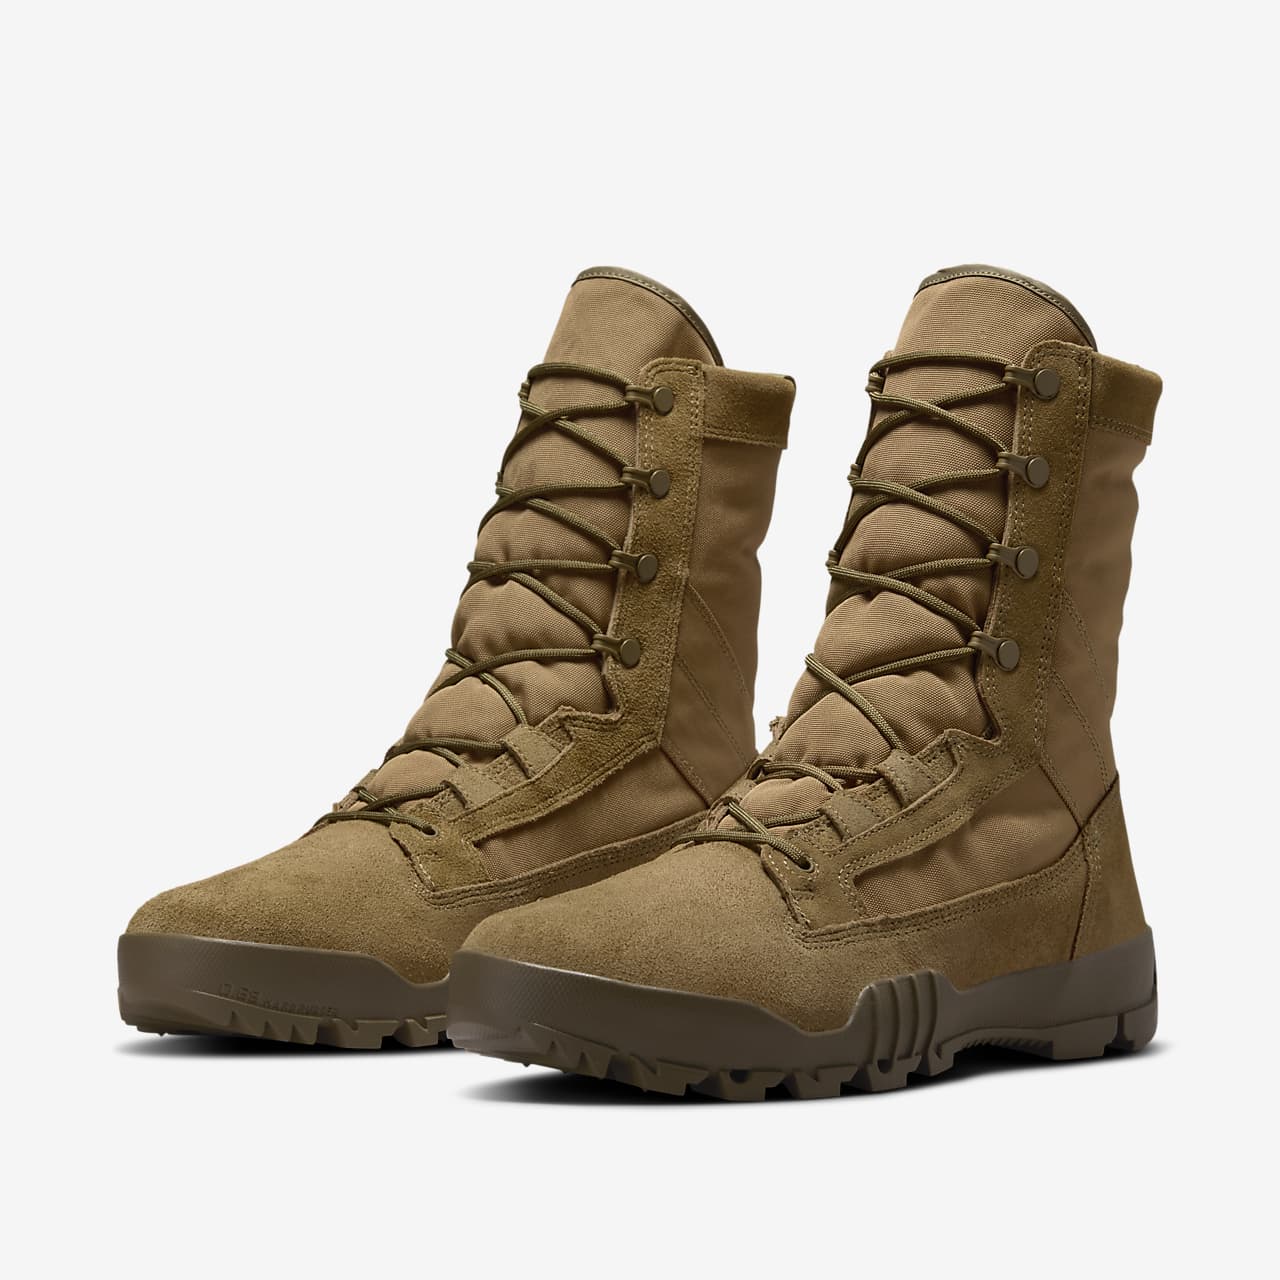 nike army boots coyote brown 